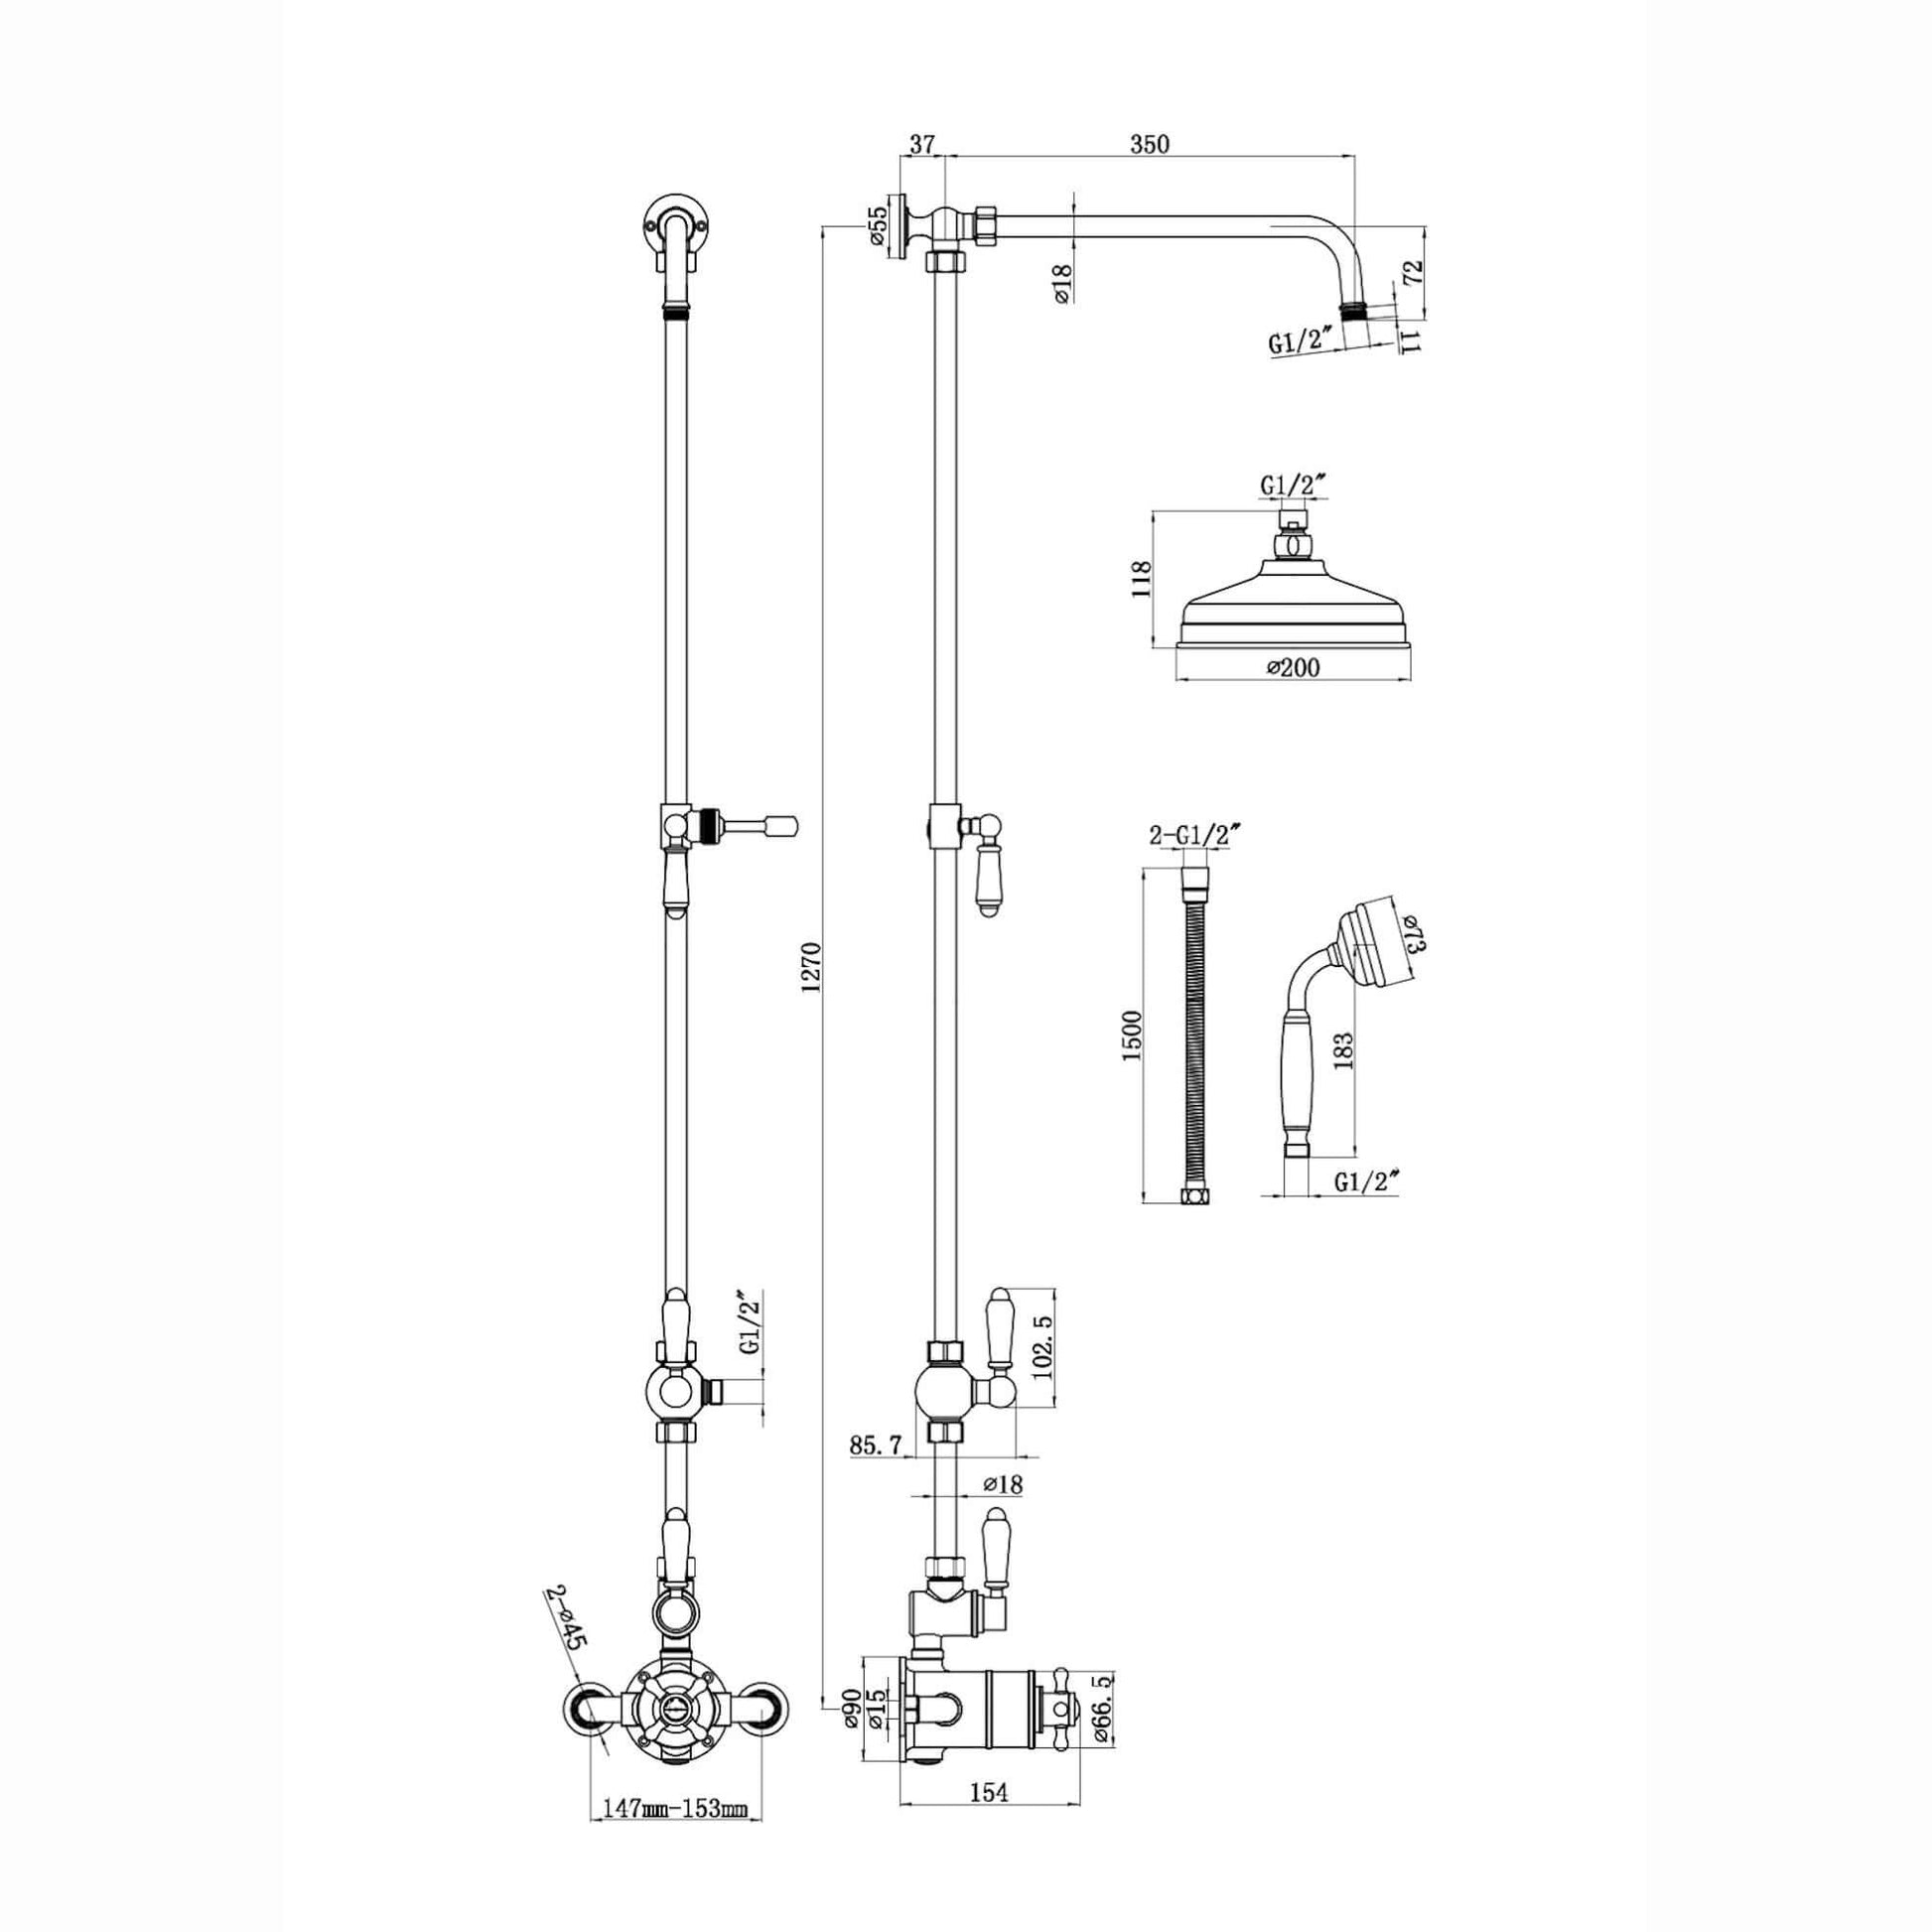 Downton Exposed Traditional Thermostatic Shower Set 2 Outlet Incl. Twin Shower Valve With Diverter, Rigid Riser Rail, 200mm Shower Head & Ceramic Handset - Antique Bronze And White - Showers